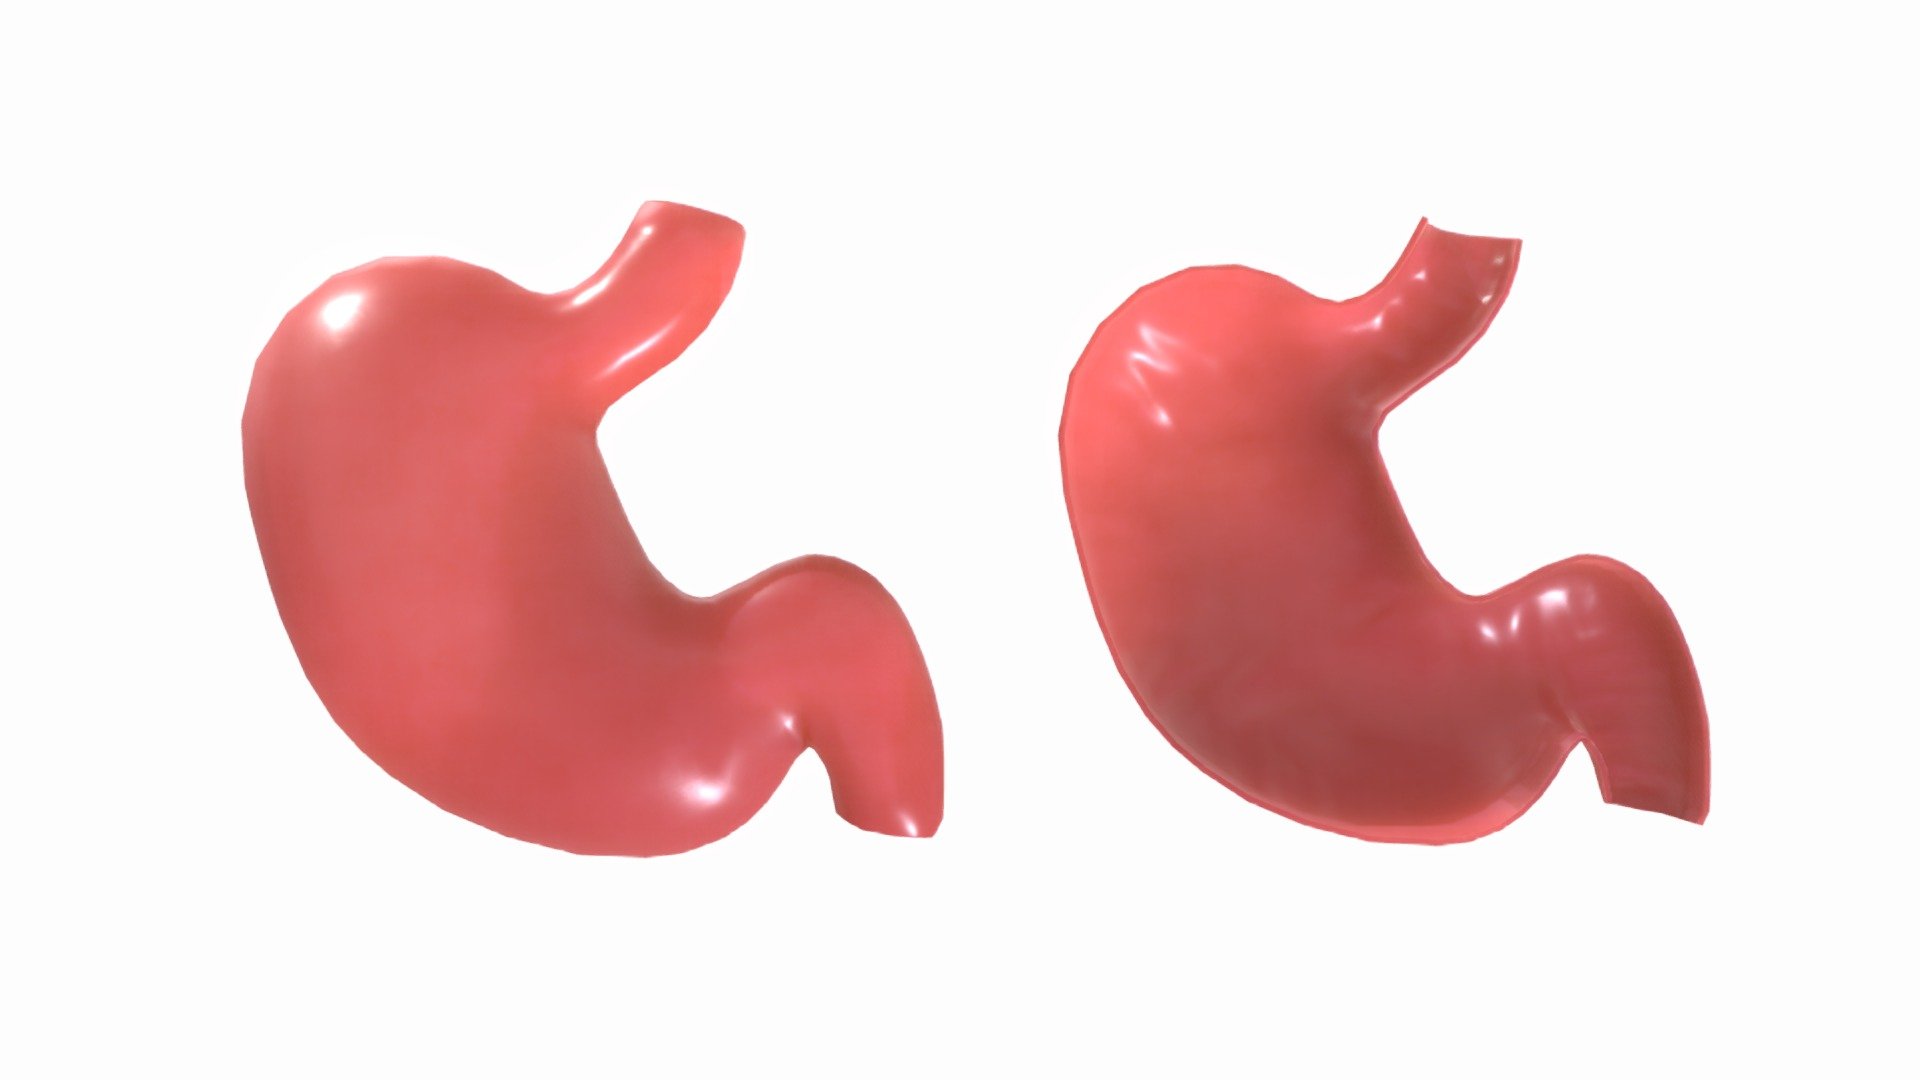 stomach human anatomy

Maps for the stomach human anatomy

Texture resolution 2048:2048




Diffuse

Normal

Glossiness

Specular

SCALE:
- Model at world center and real scale:
       Metric in centimeter
       1 unit = 1 centimeter




Quads only

No N-gons

I wish pleasant use! - Stomach - Buy Royalty Free 3D model by zames1992 3d model